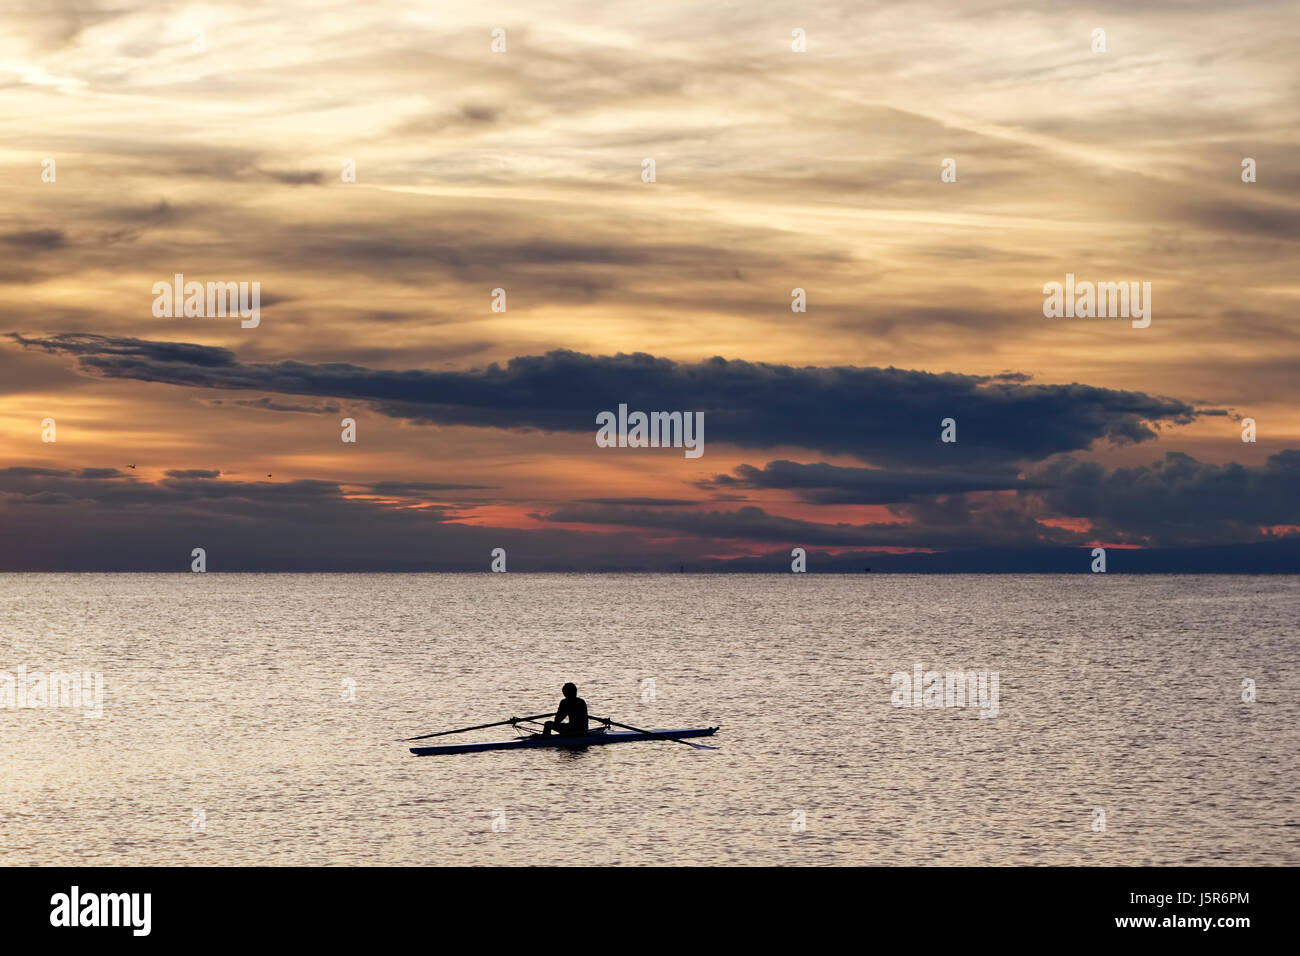 Sport. Solitary rower during his training session in the sunset light. Stock Photo